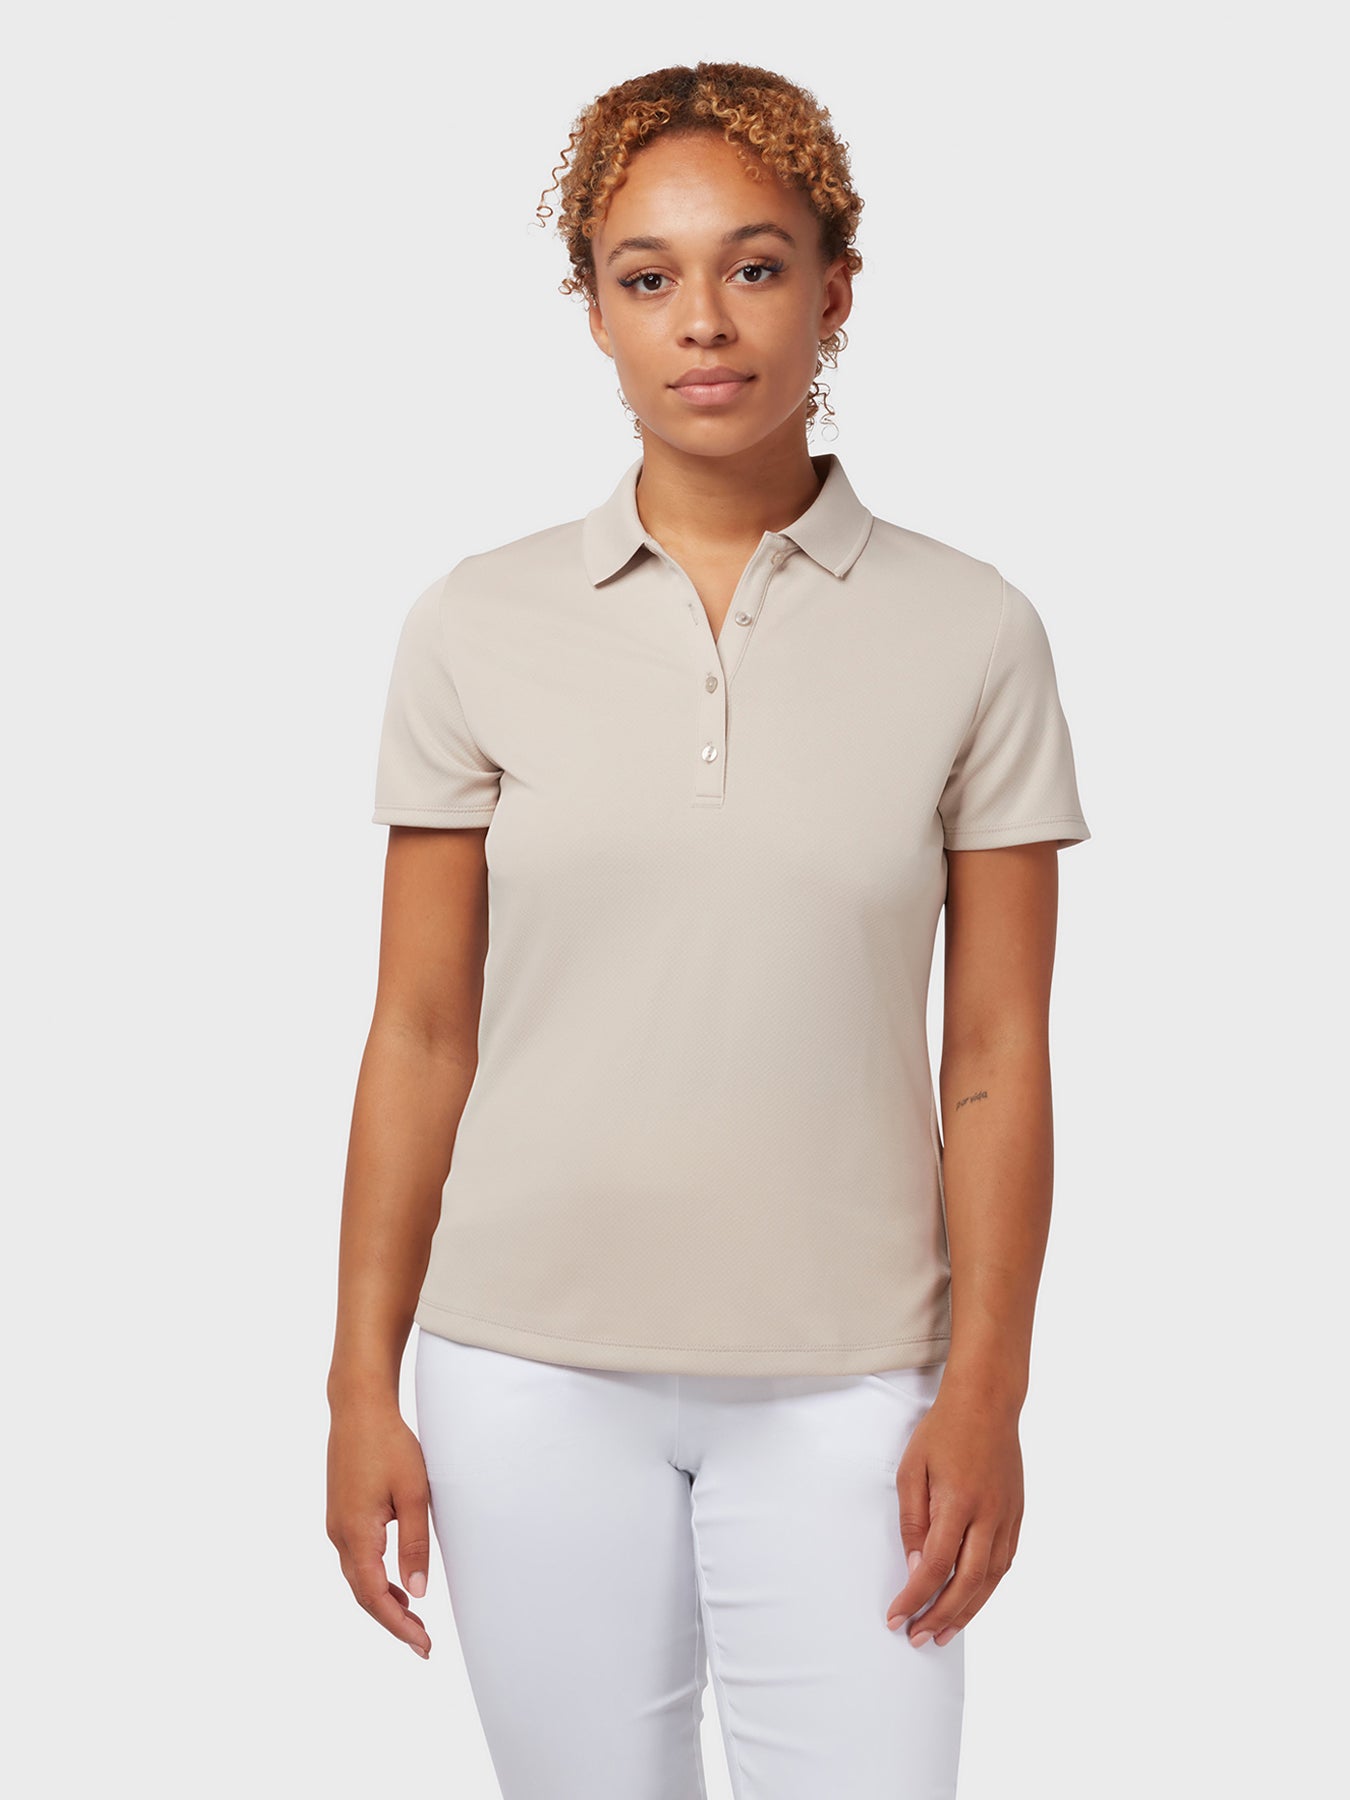 View Swing Tech Womens Polo In Chateau Grey Chateau Grey M information